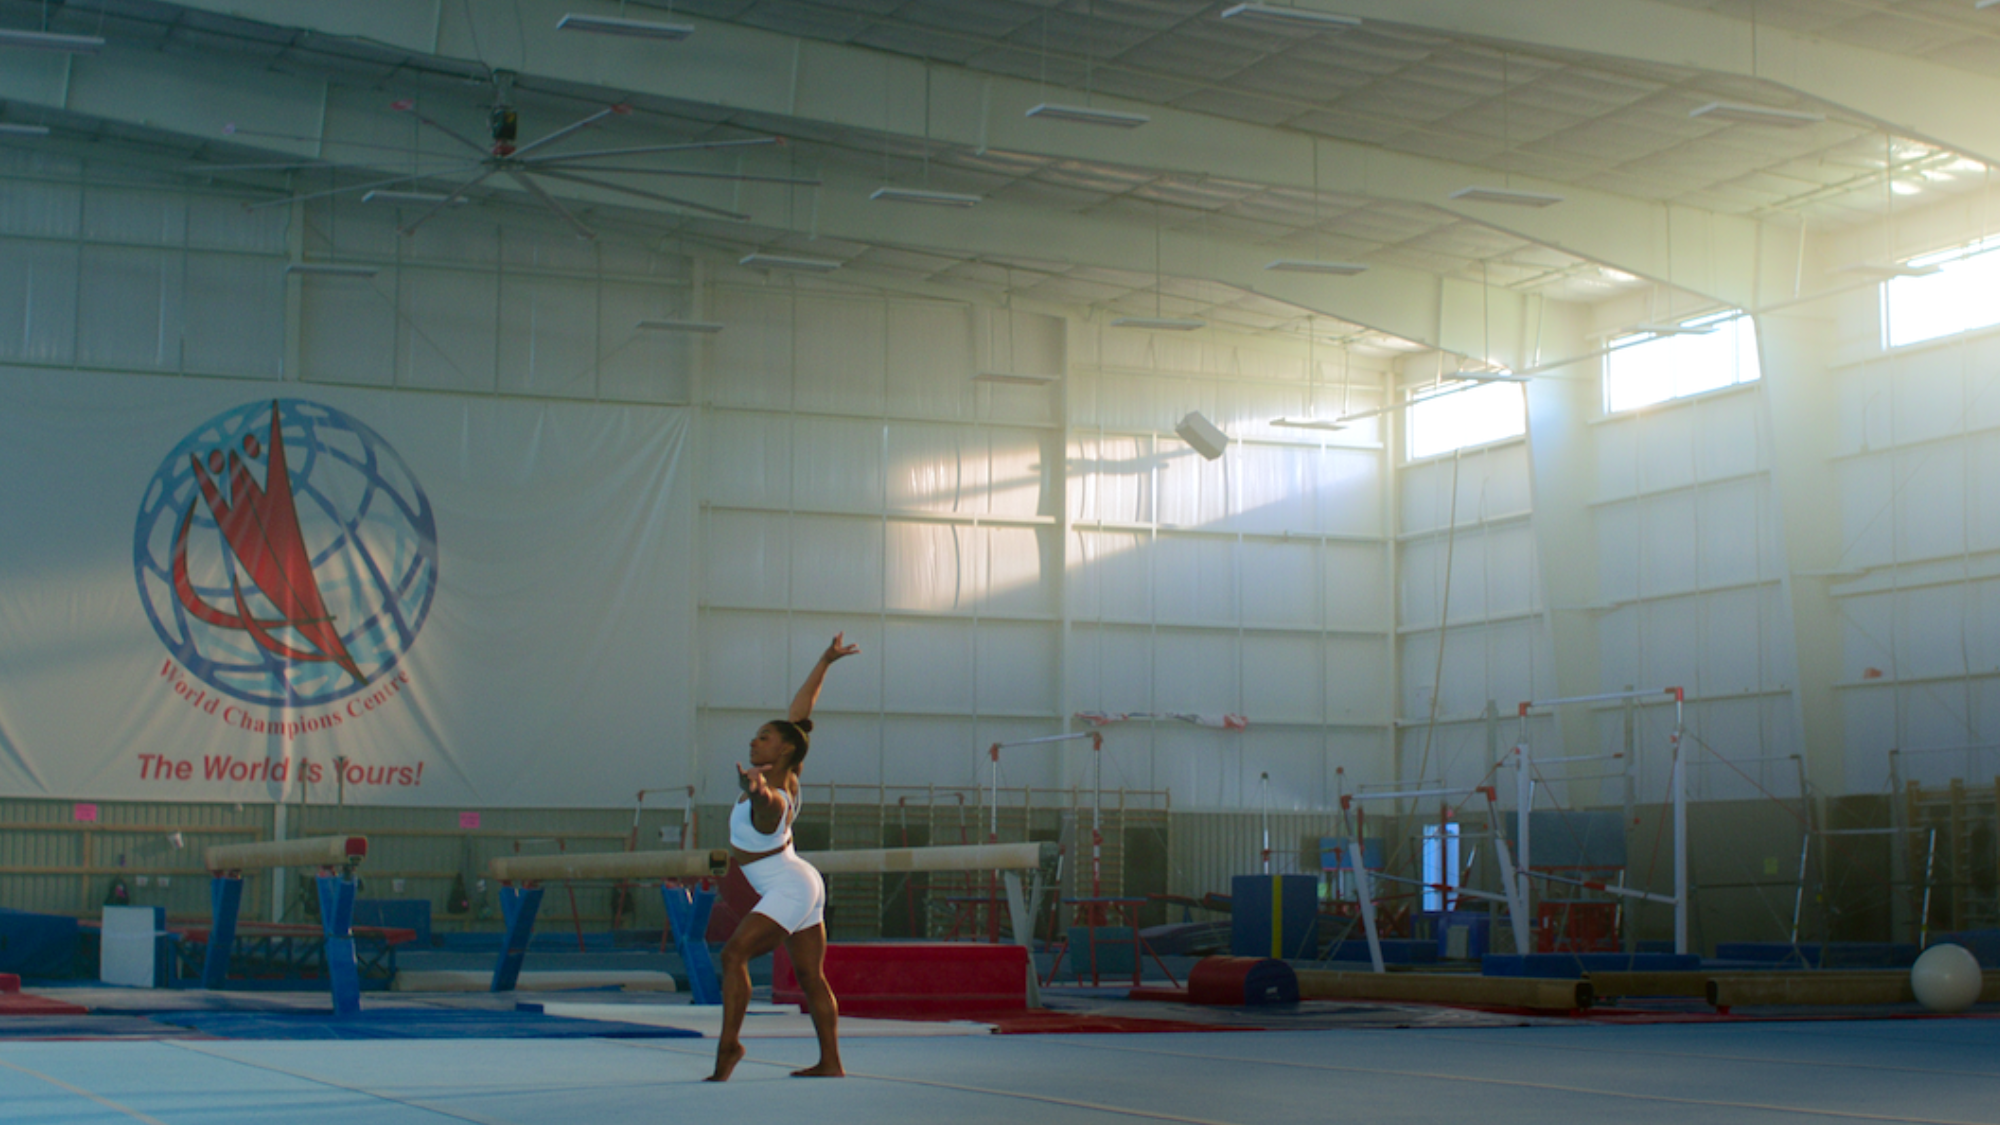 Simone Biles: Rising – an 'elegantly paced and vulnerable' portrait of the gymnast